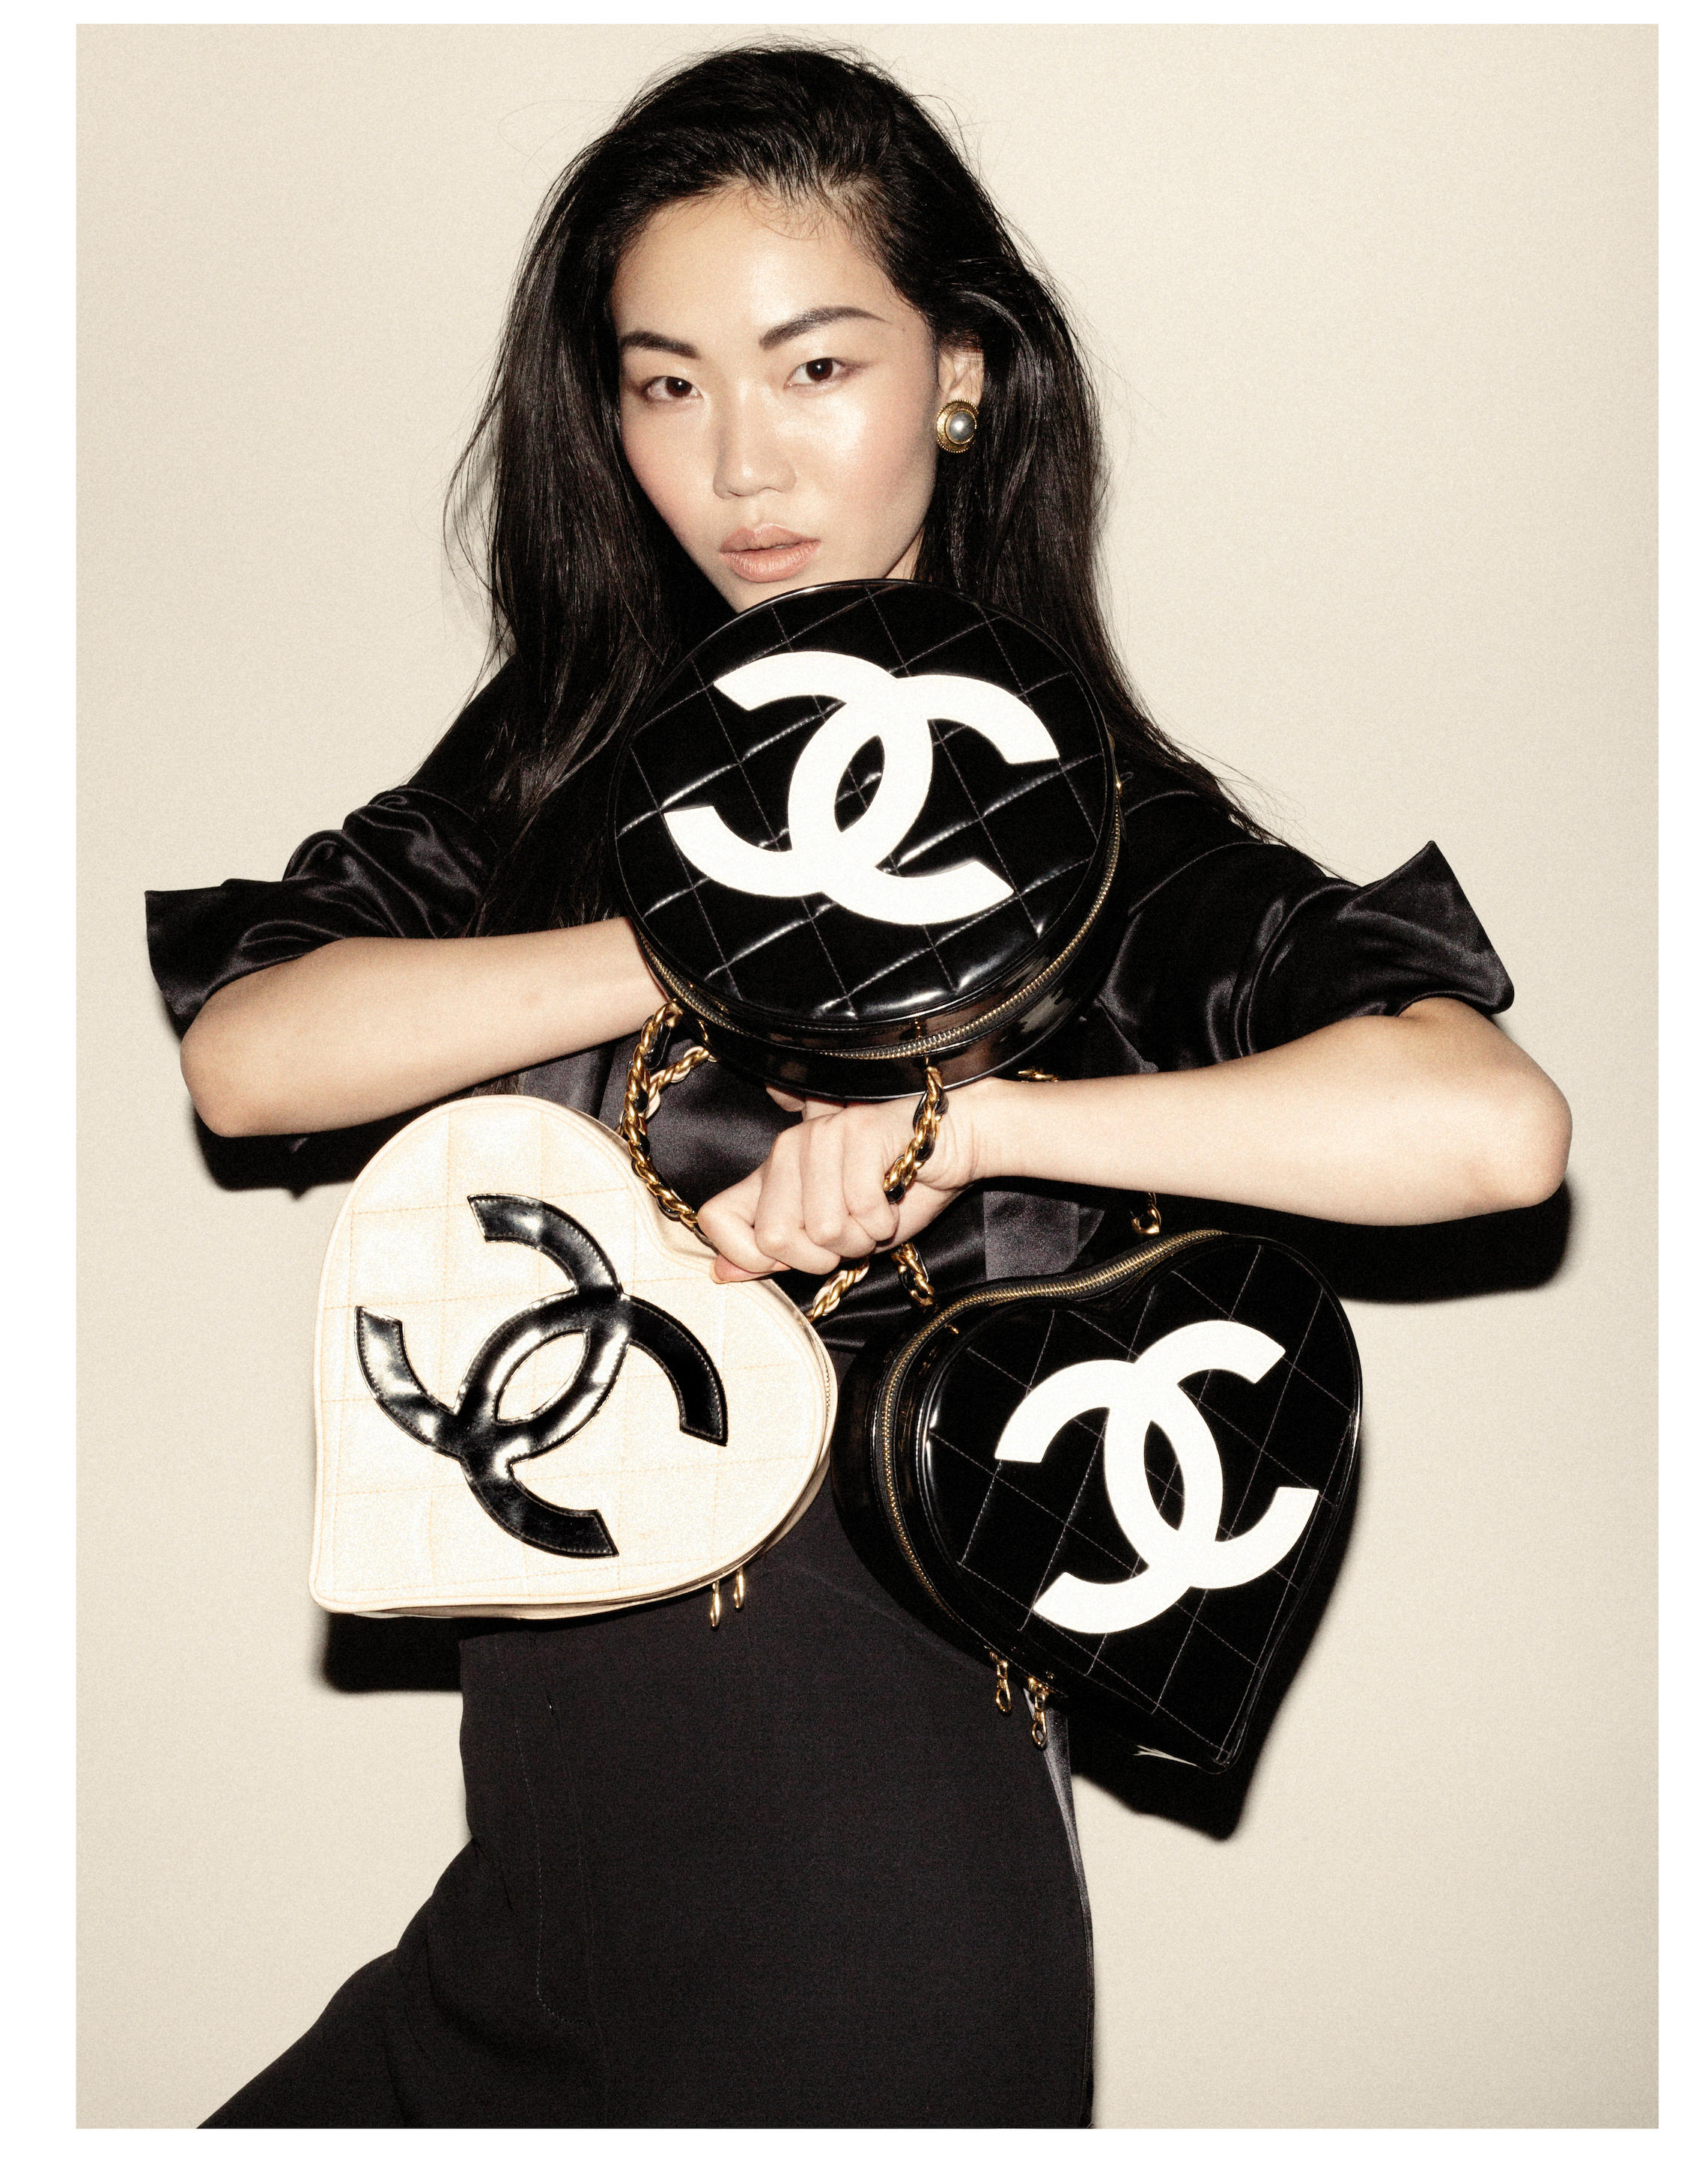 Chanel Handbags for Sale at Auction